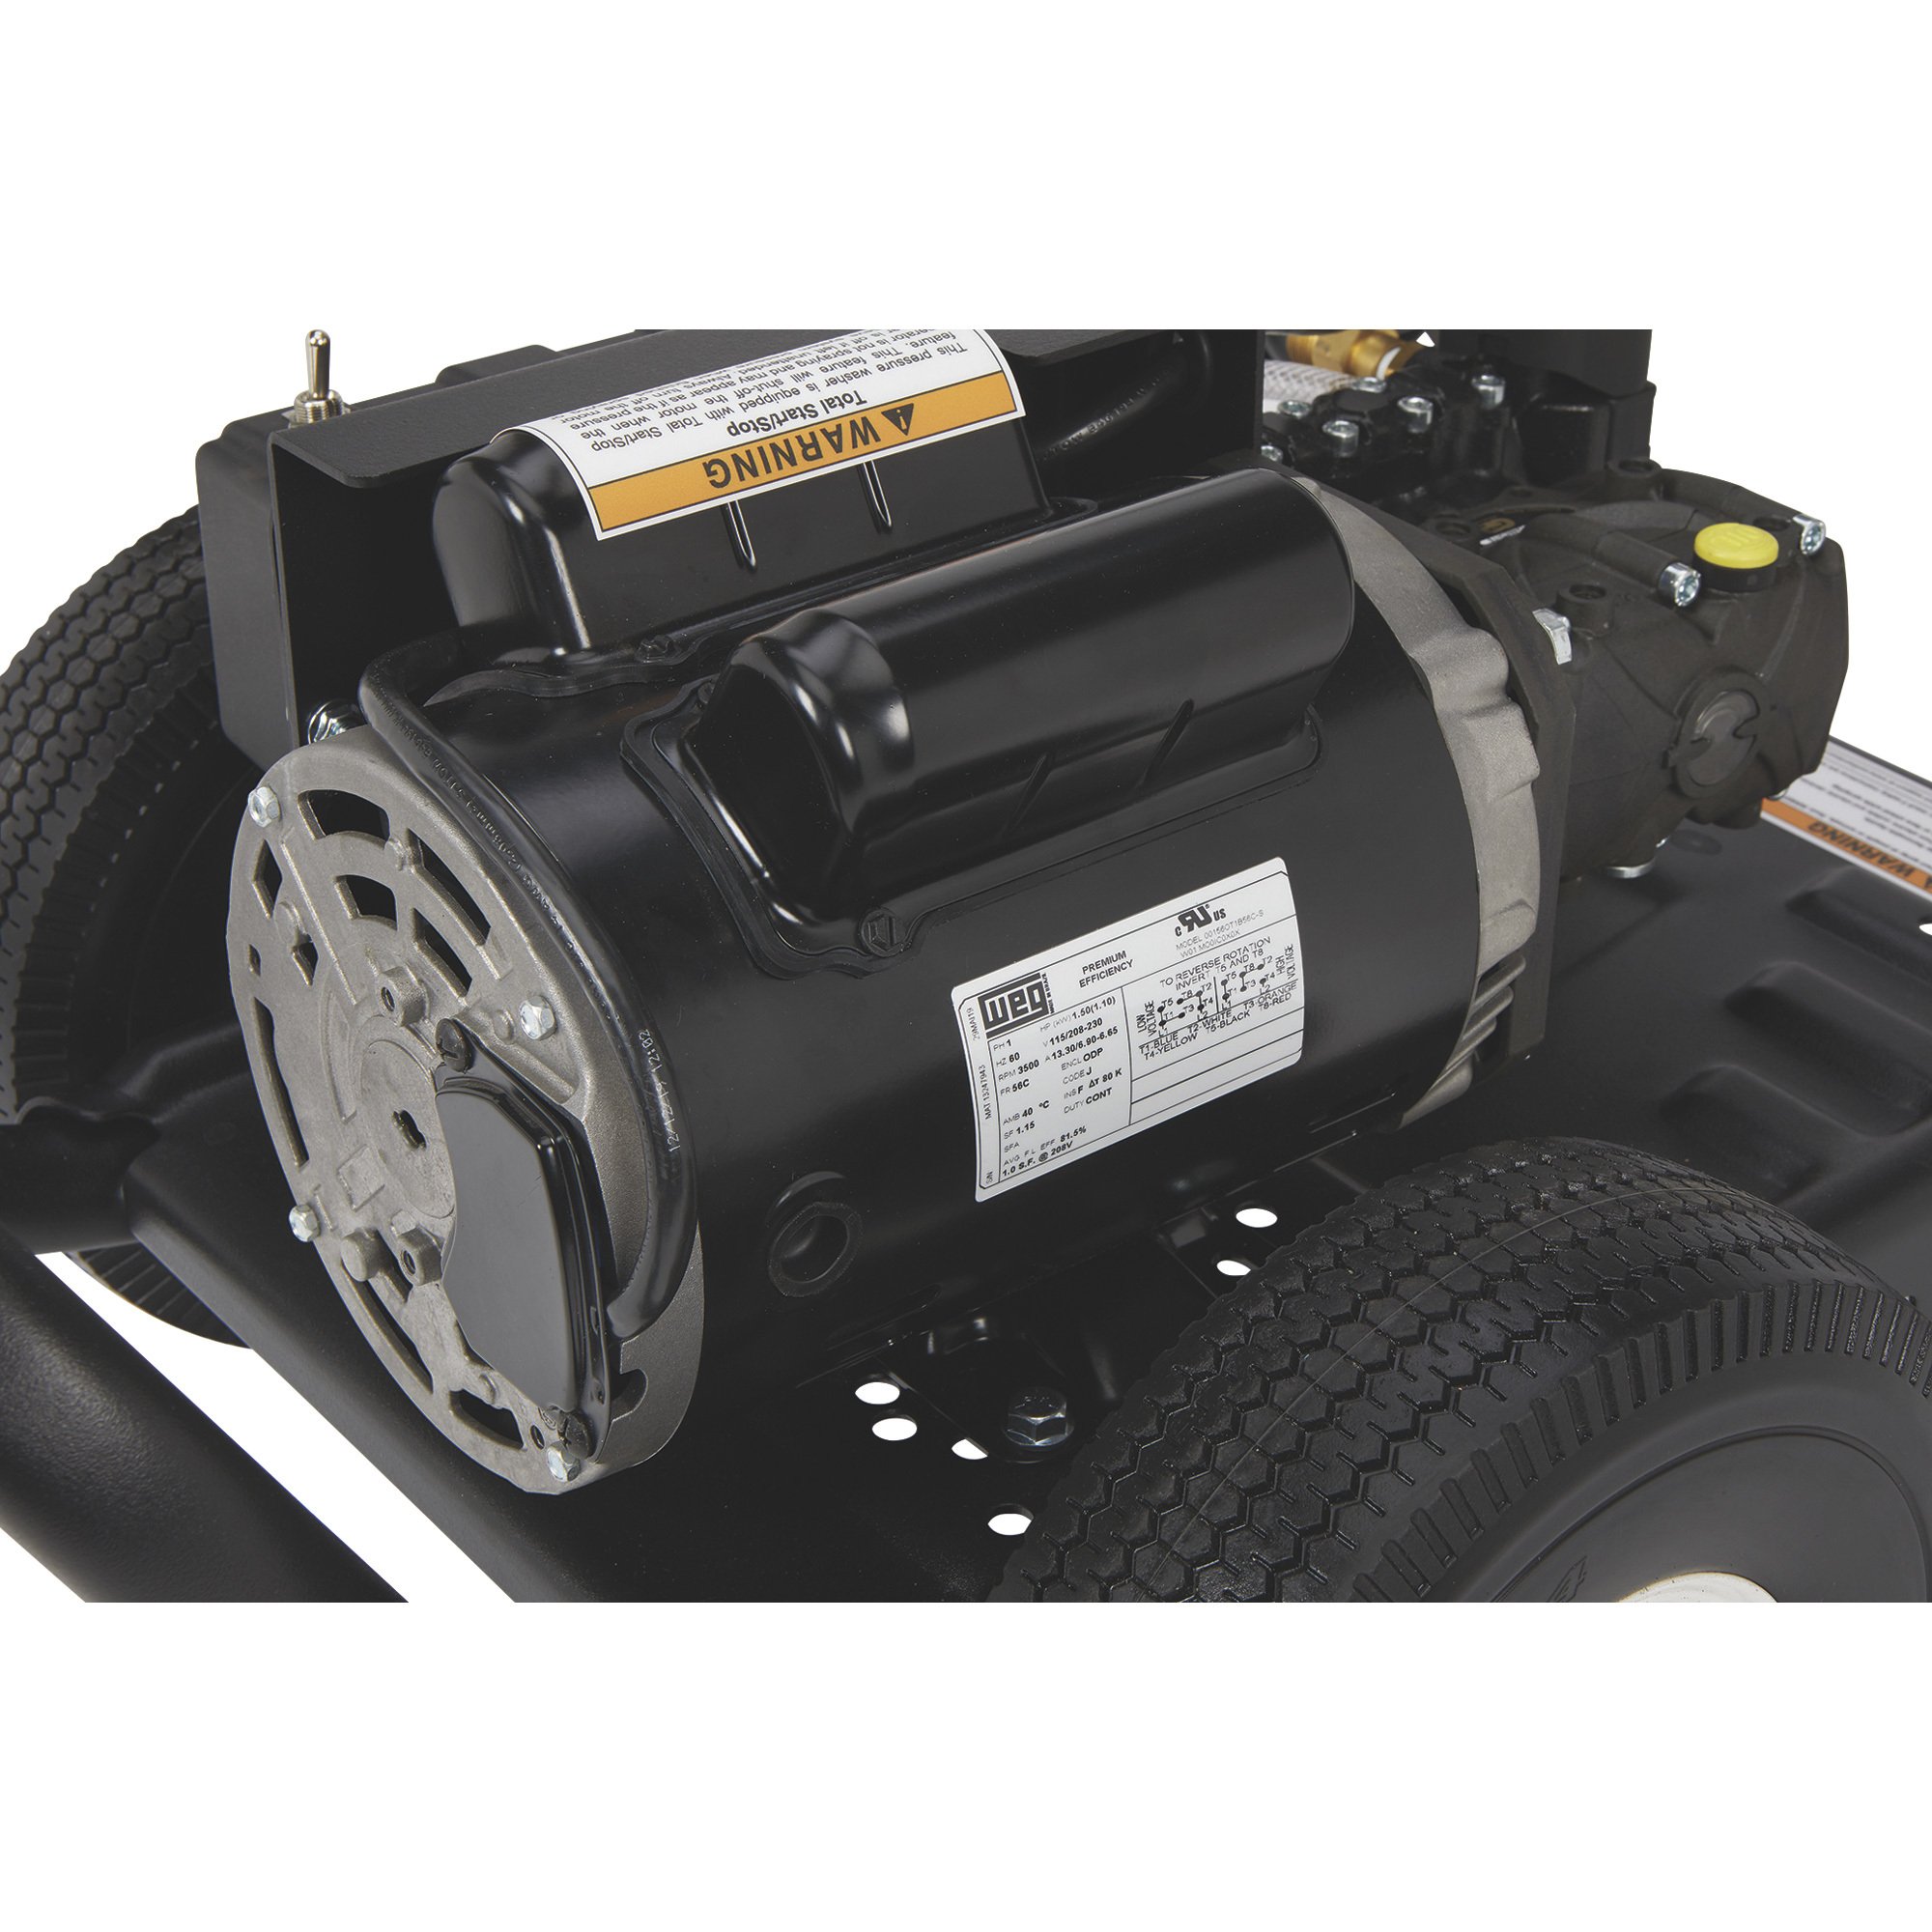 Northstar Electric Cold Water Total Start/Stop Pressure Washer —2000 psi, 1.5 GPM, 120 Volts 1571102